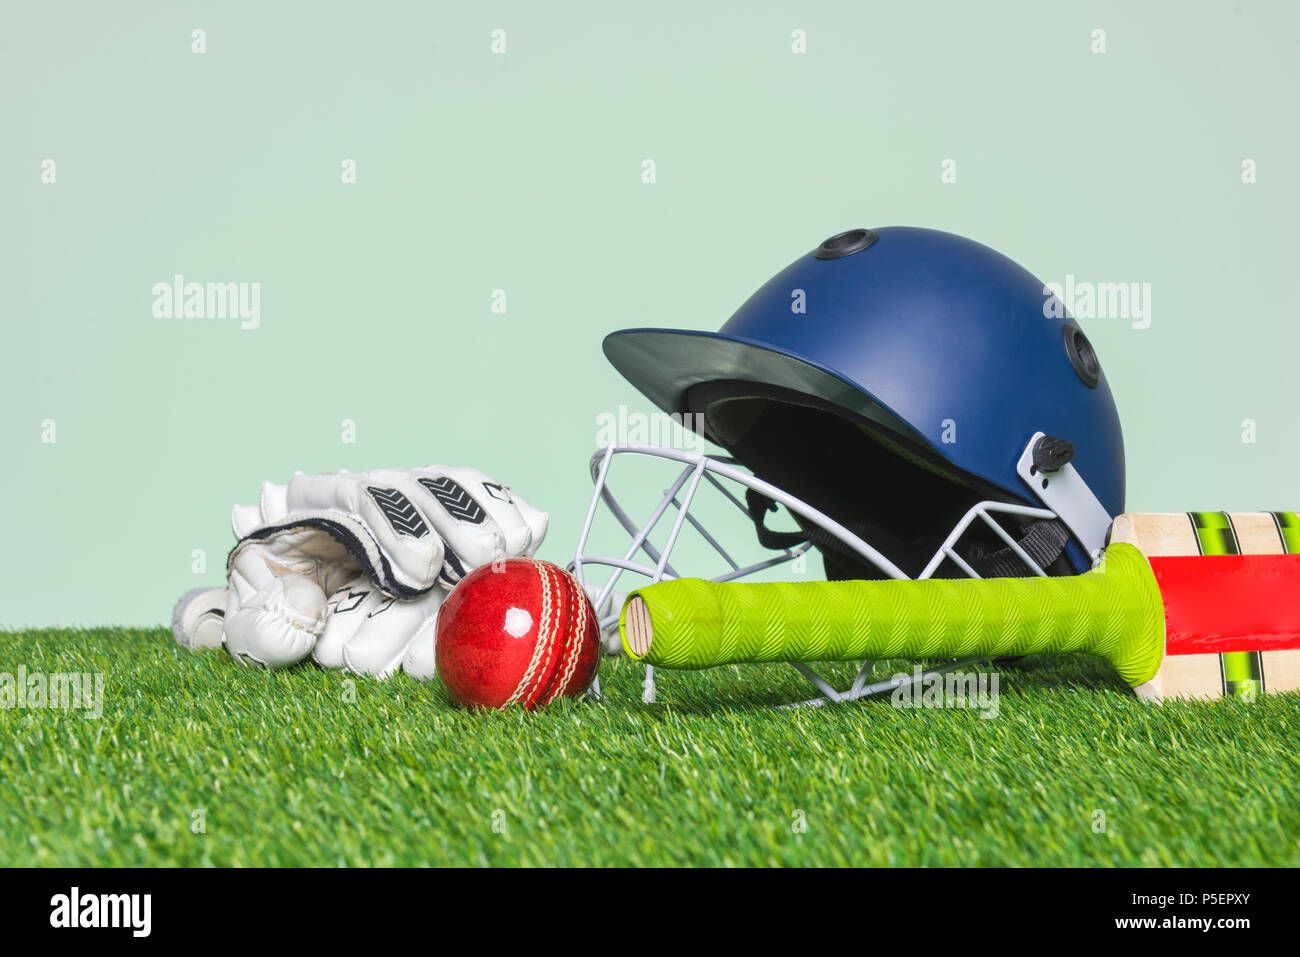 Cricket equipment with bat, ball, helmet and gloves on grass with green background. Stock Photo